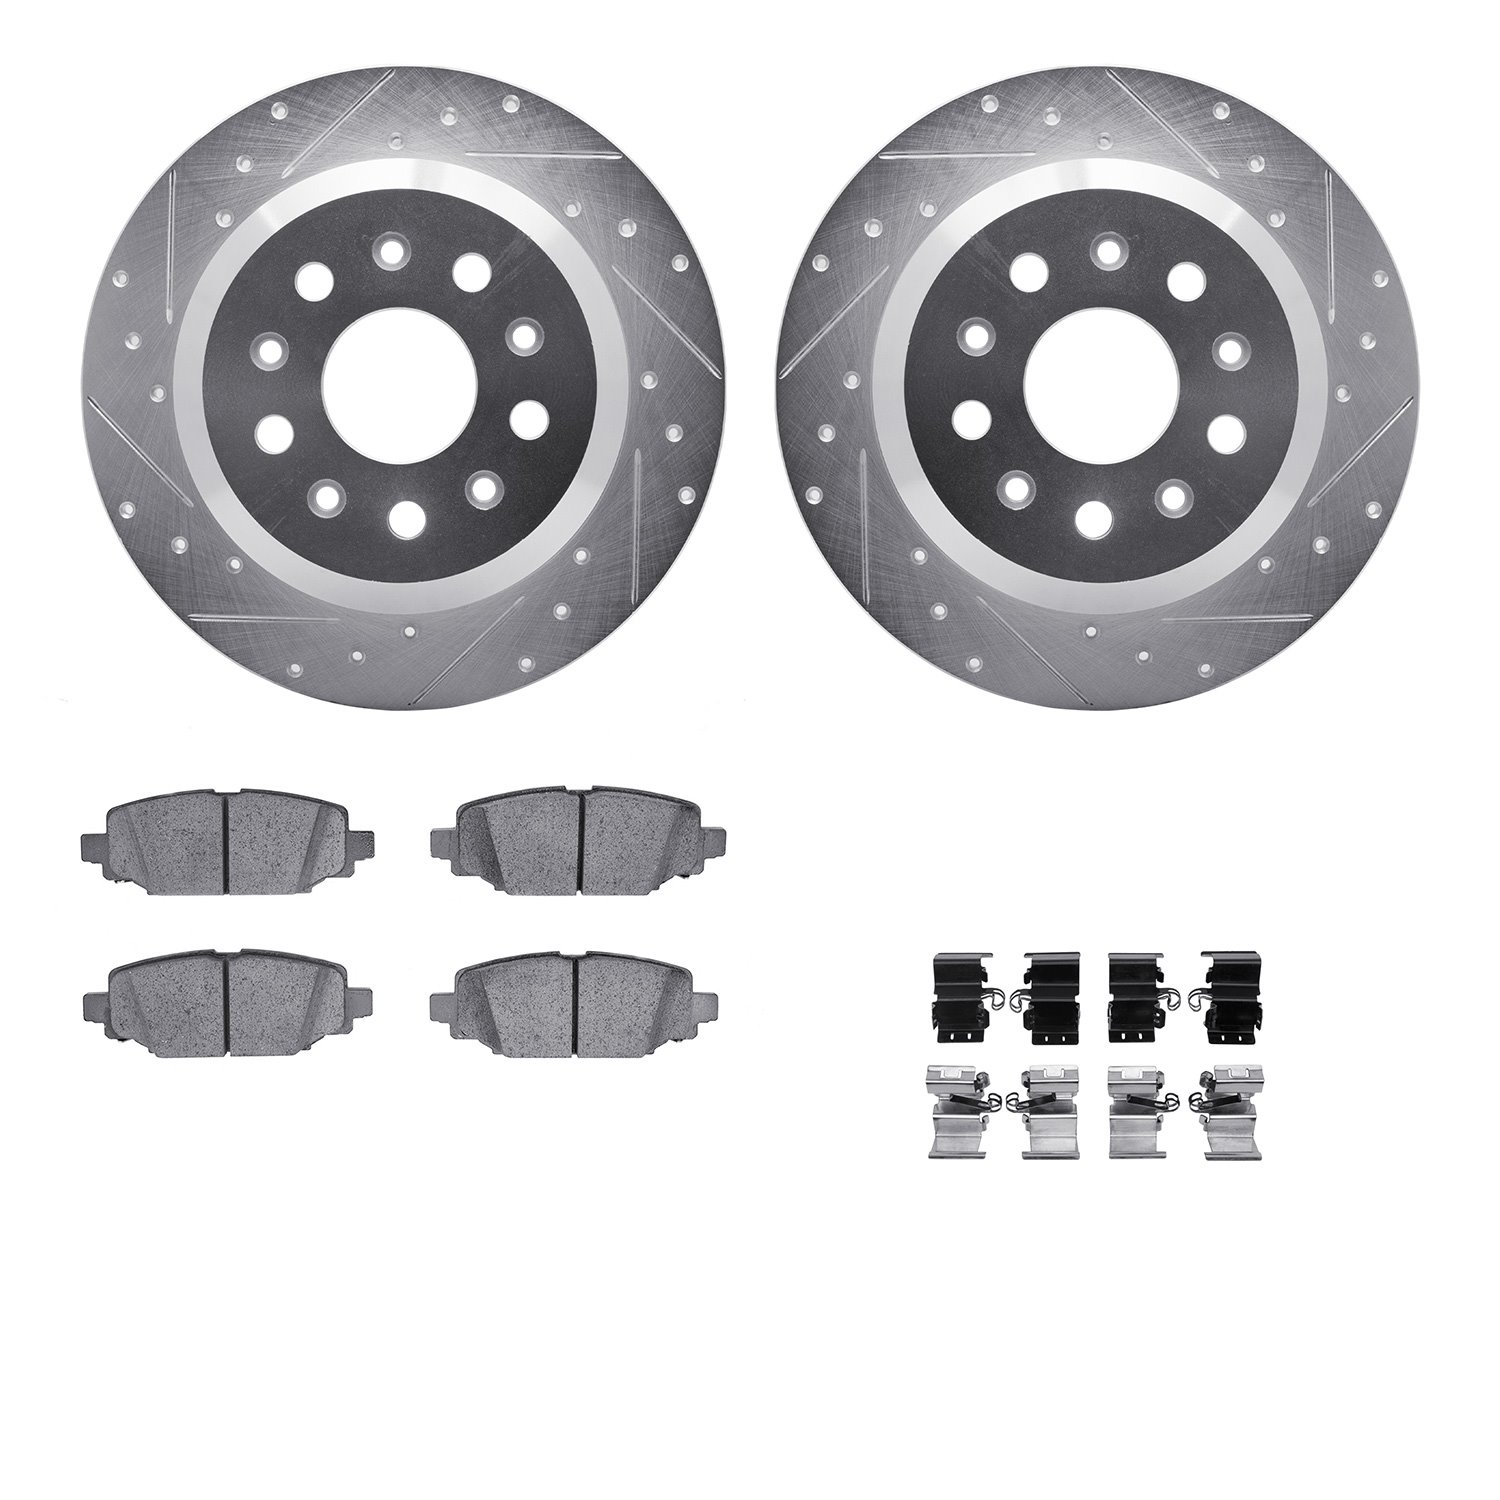 7412-42046 Drilled/Slotted Brake Rotors with Ultimate-Duty Brake Pads Kit & Hardware [Silver], Fits Select Mopar, Position: Rear